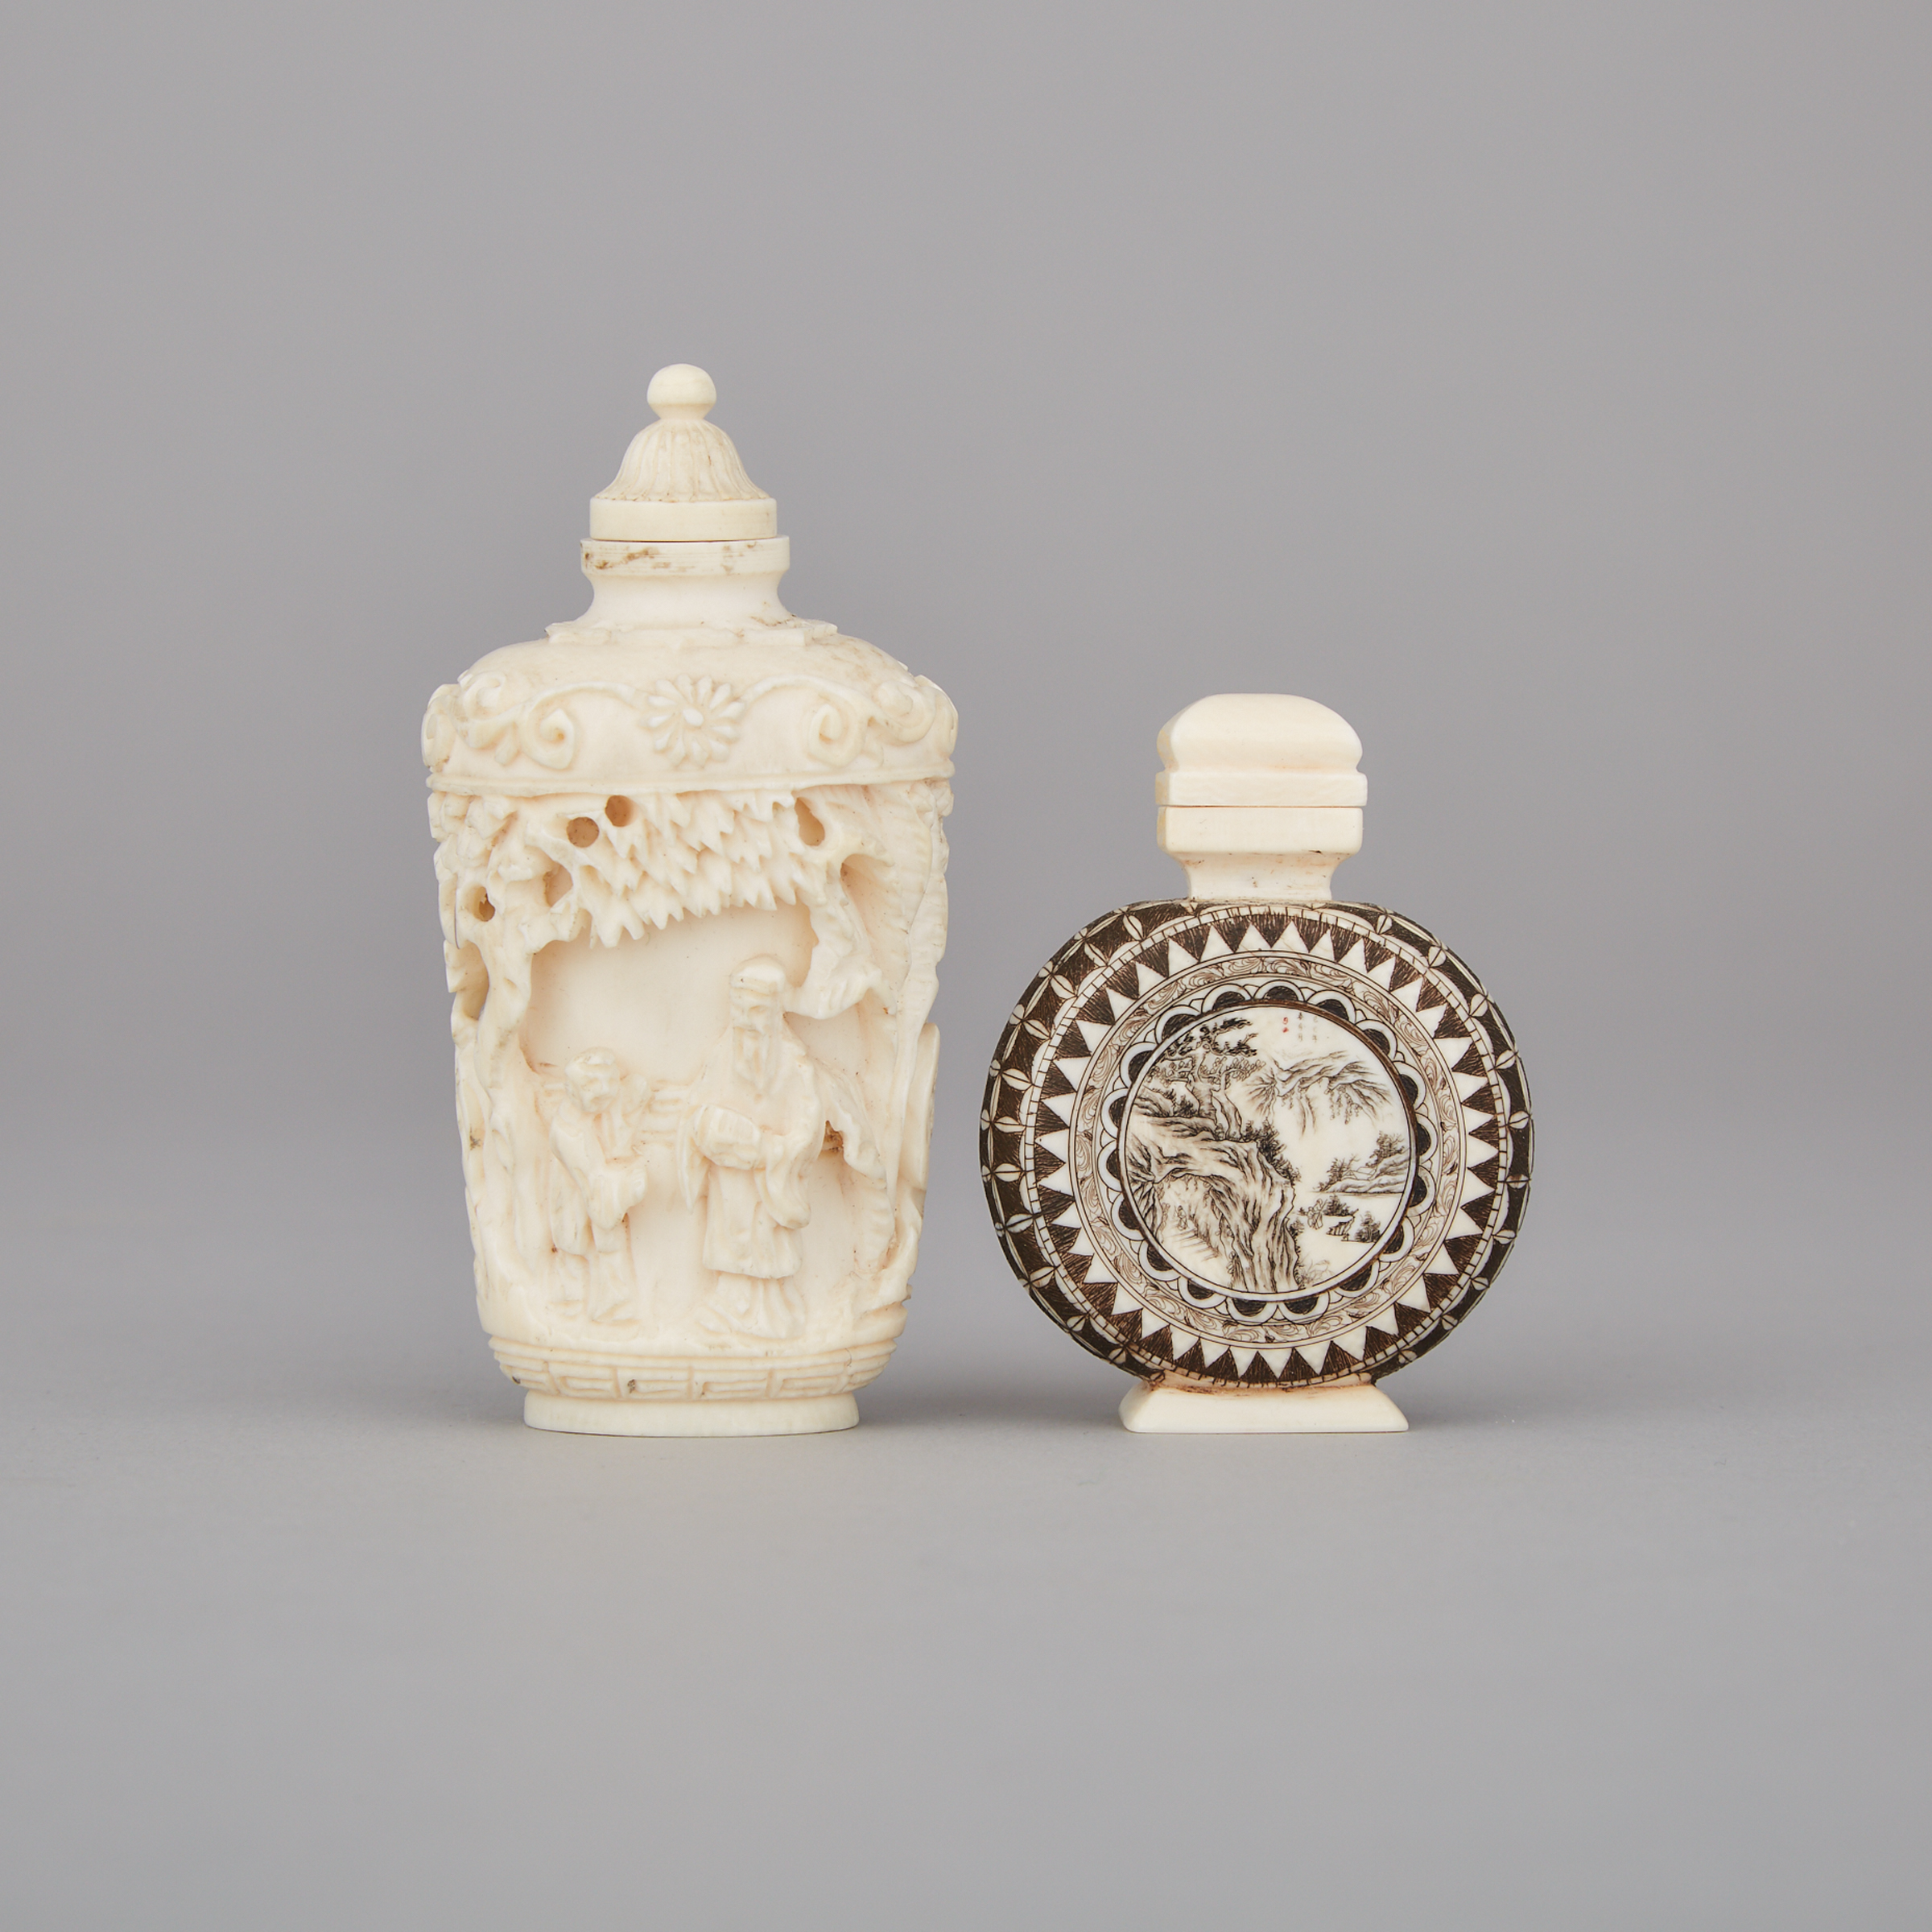 Two Ivory Snuff Bottles, Early 20th Century